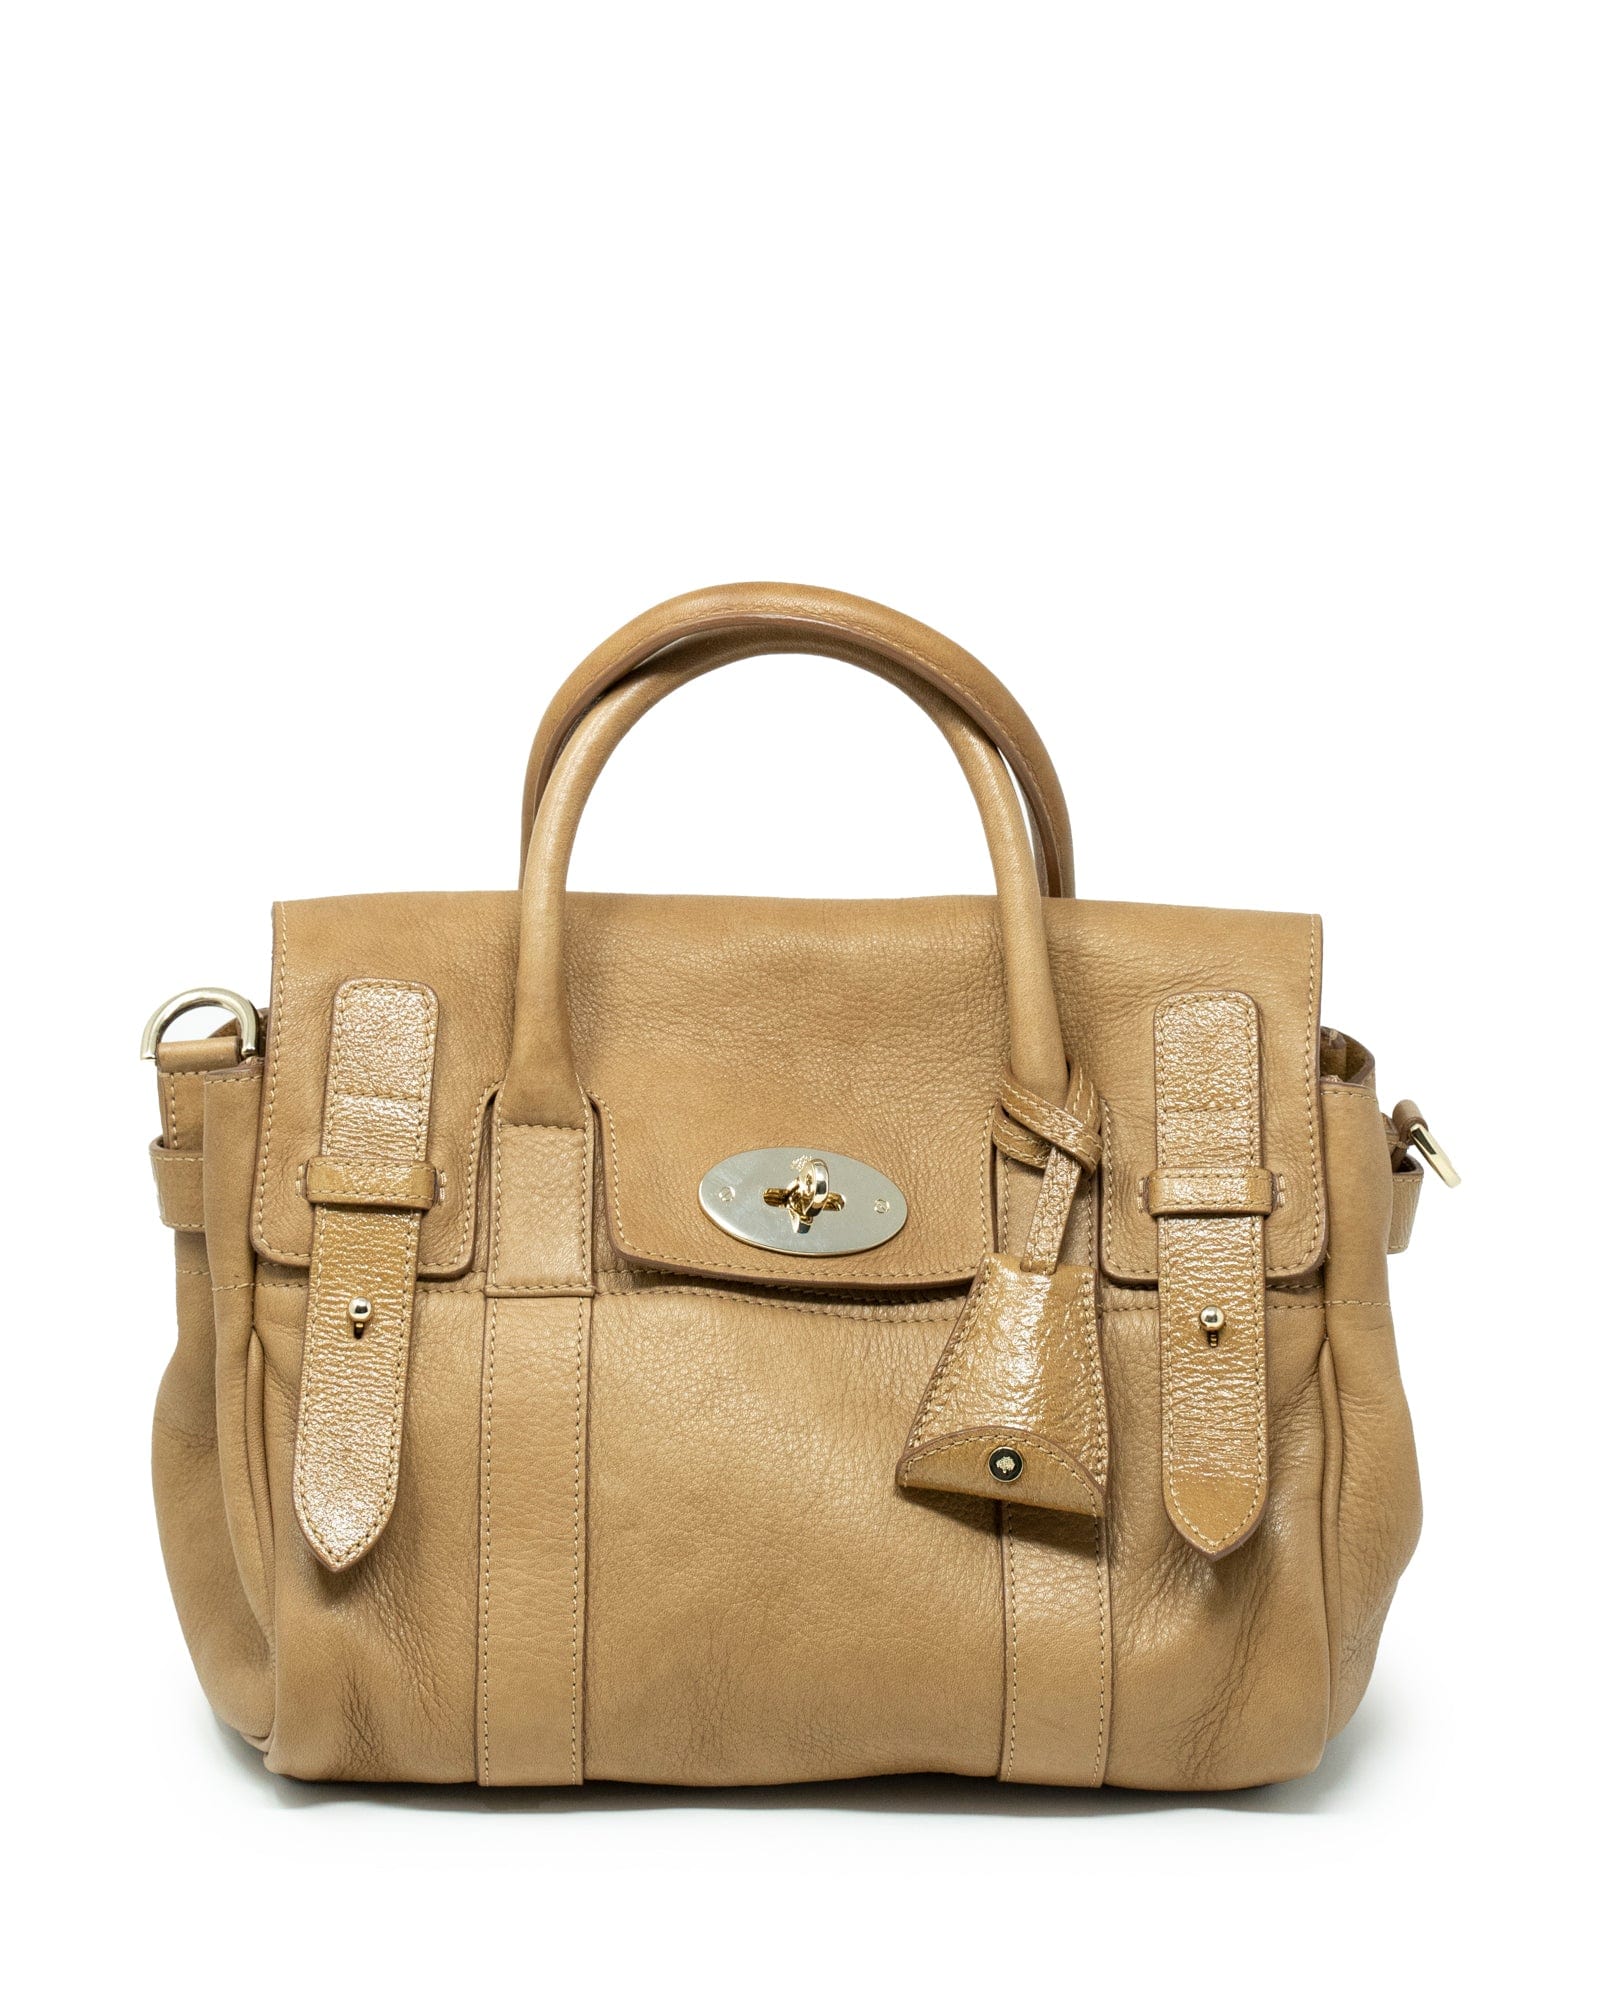 Mulberry Mulberry bag brown - AGL1925